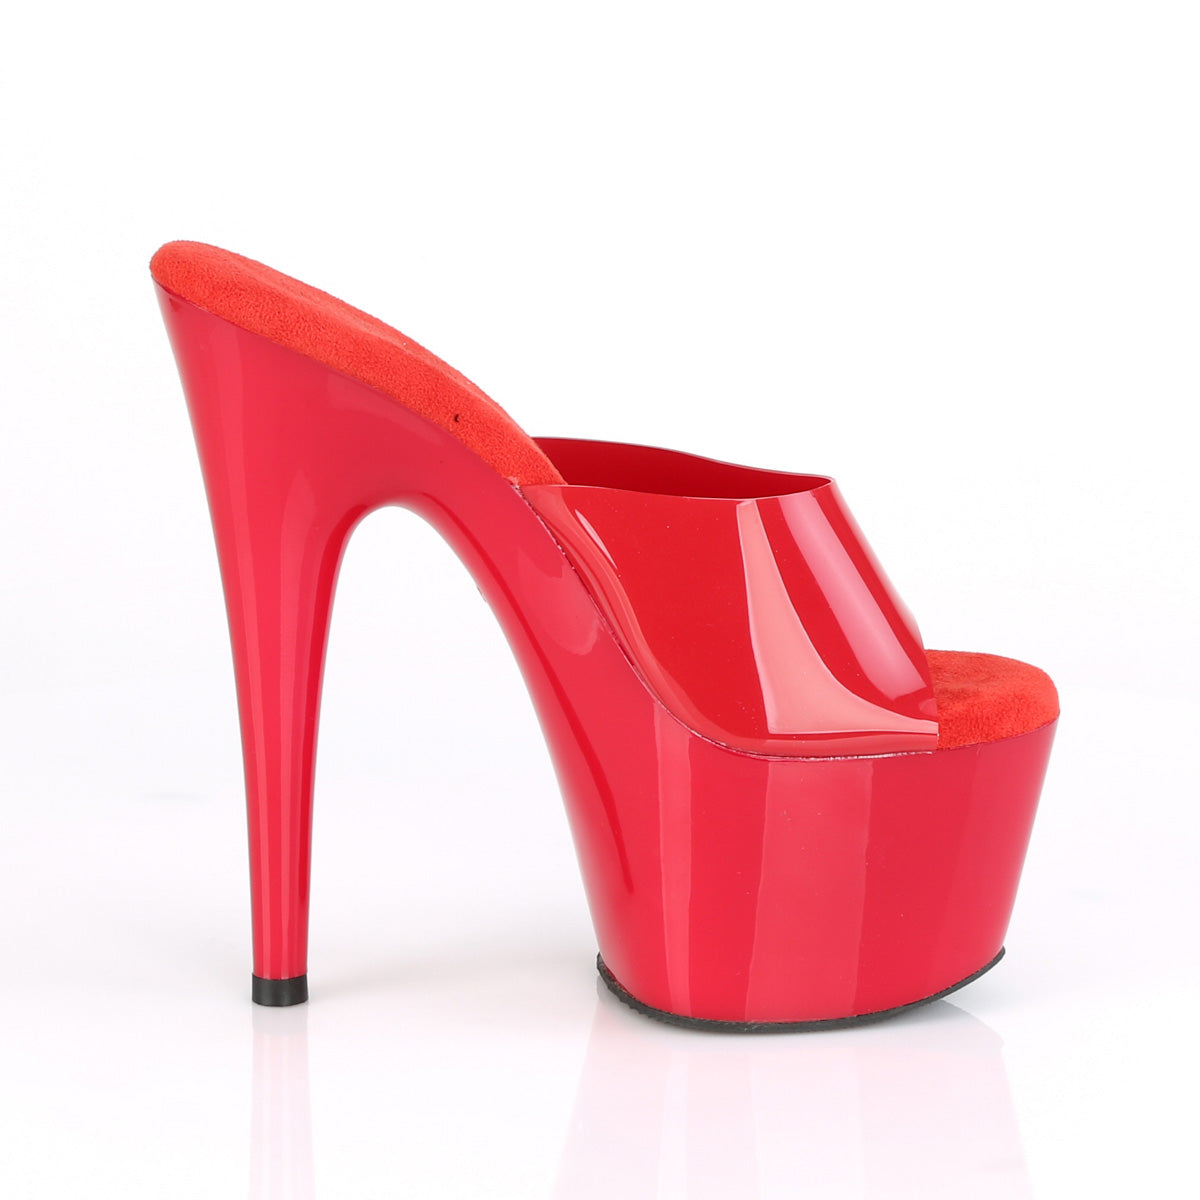 ADORE-701N Pleaser 7 Inch Heel Red Pole Dancing Shoes-Pleaser- Sexy Shoes Fetish Heels